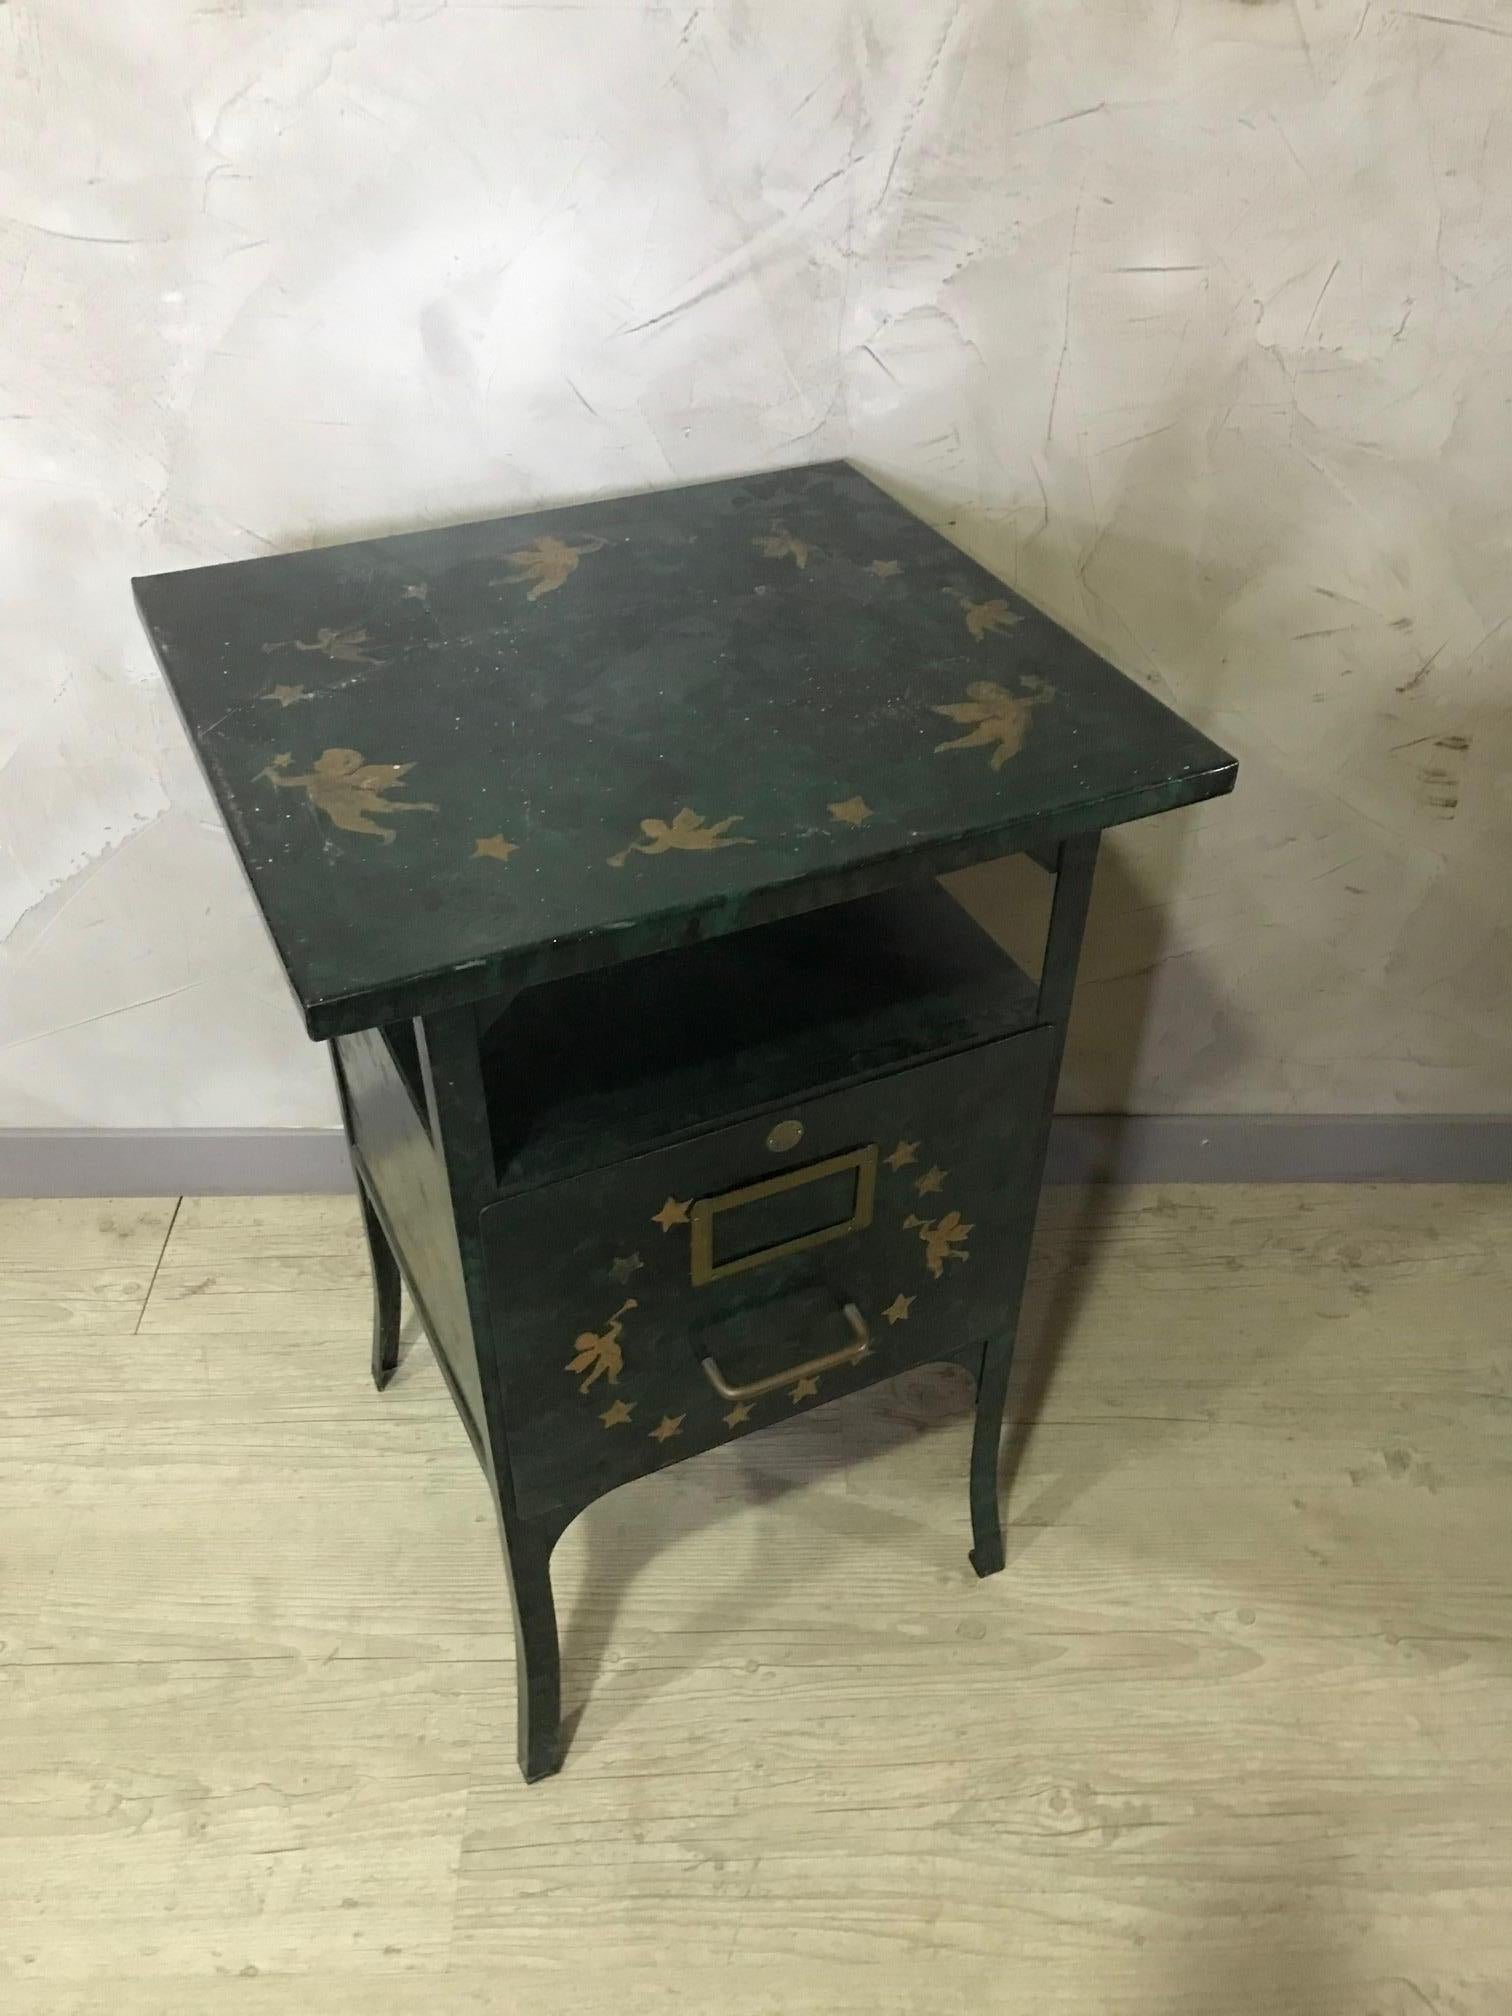 Original 20th century French green metal rolling storage cabinet from the 1920s.
Used to help nurse in Hospital.
Four wheels. Green metal and drawing golden angels and stars.
Stamp of the French Manufacturer in Paris.
Large opening drawer.
Good